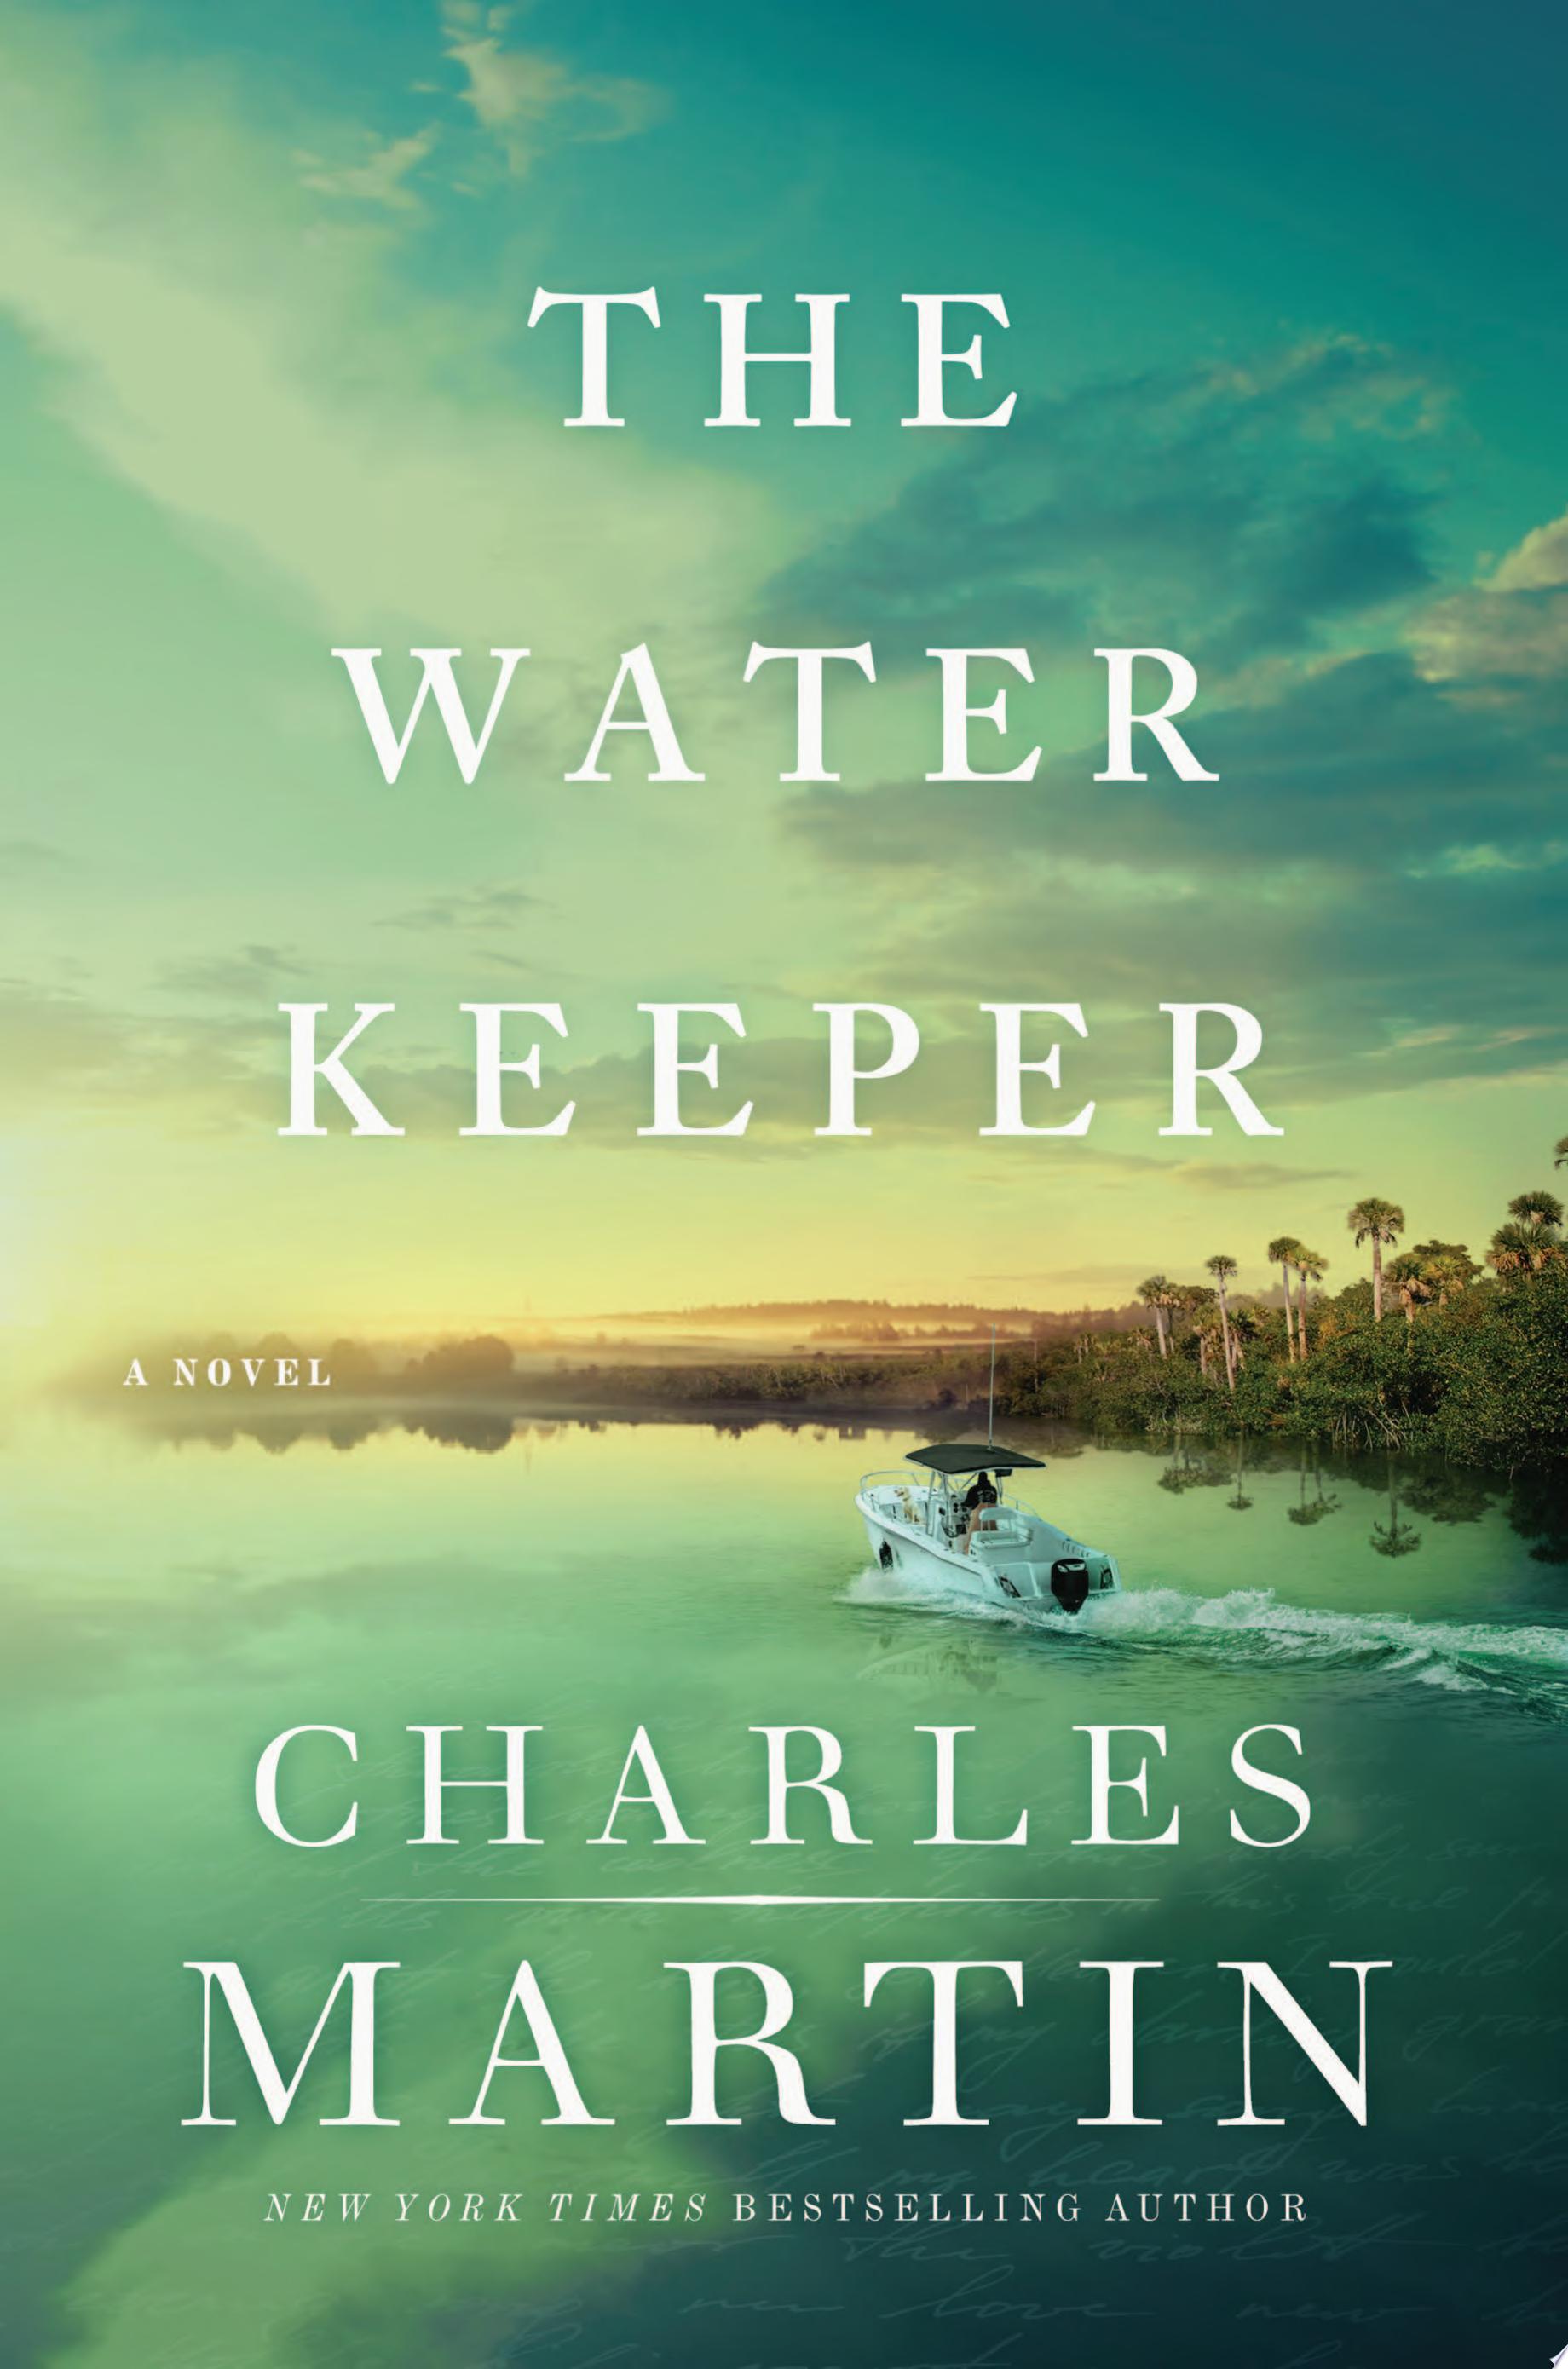 Image for "The Water Keeper"